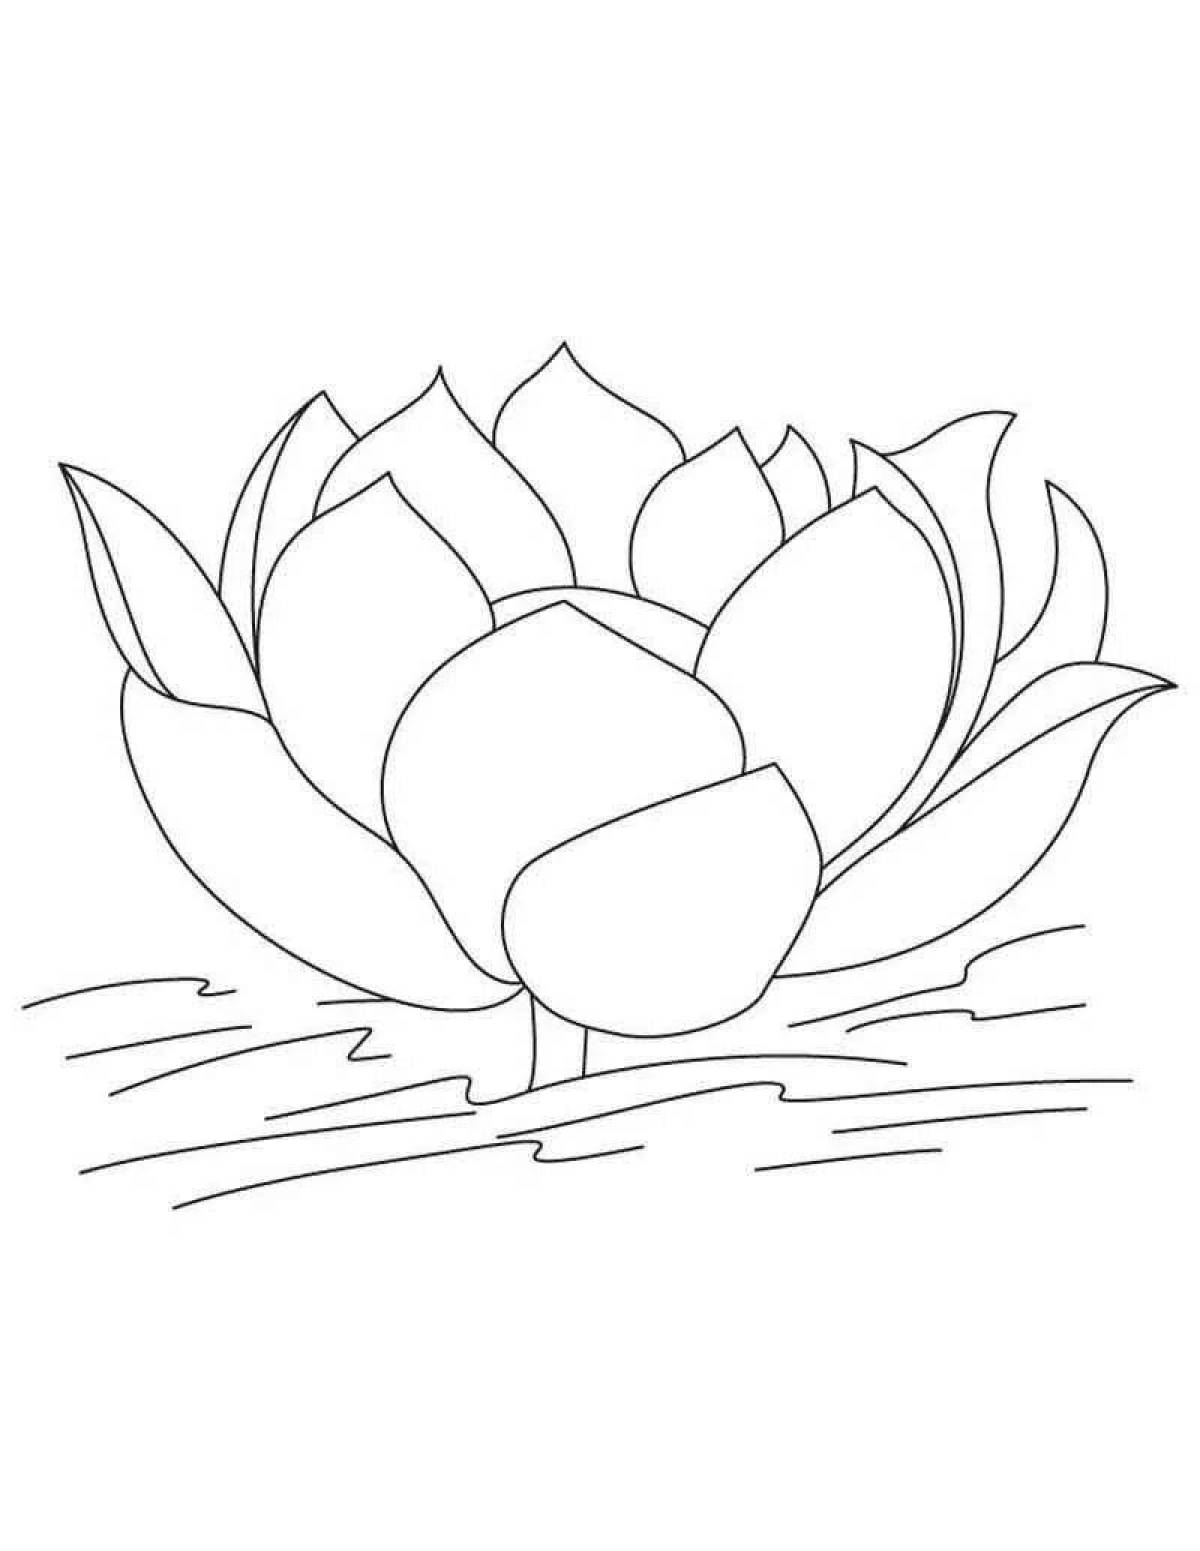 Adorable white water lily coloring page